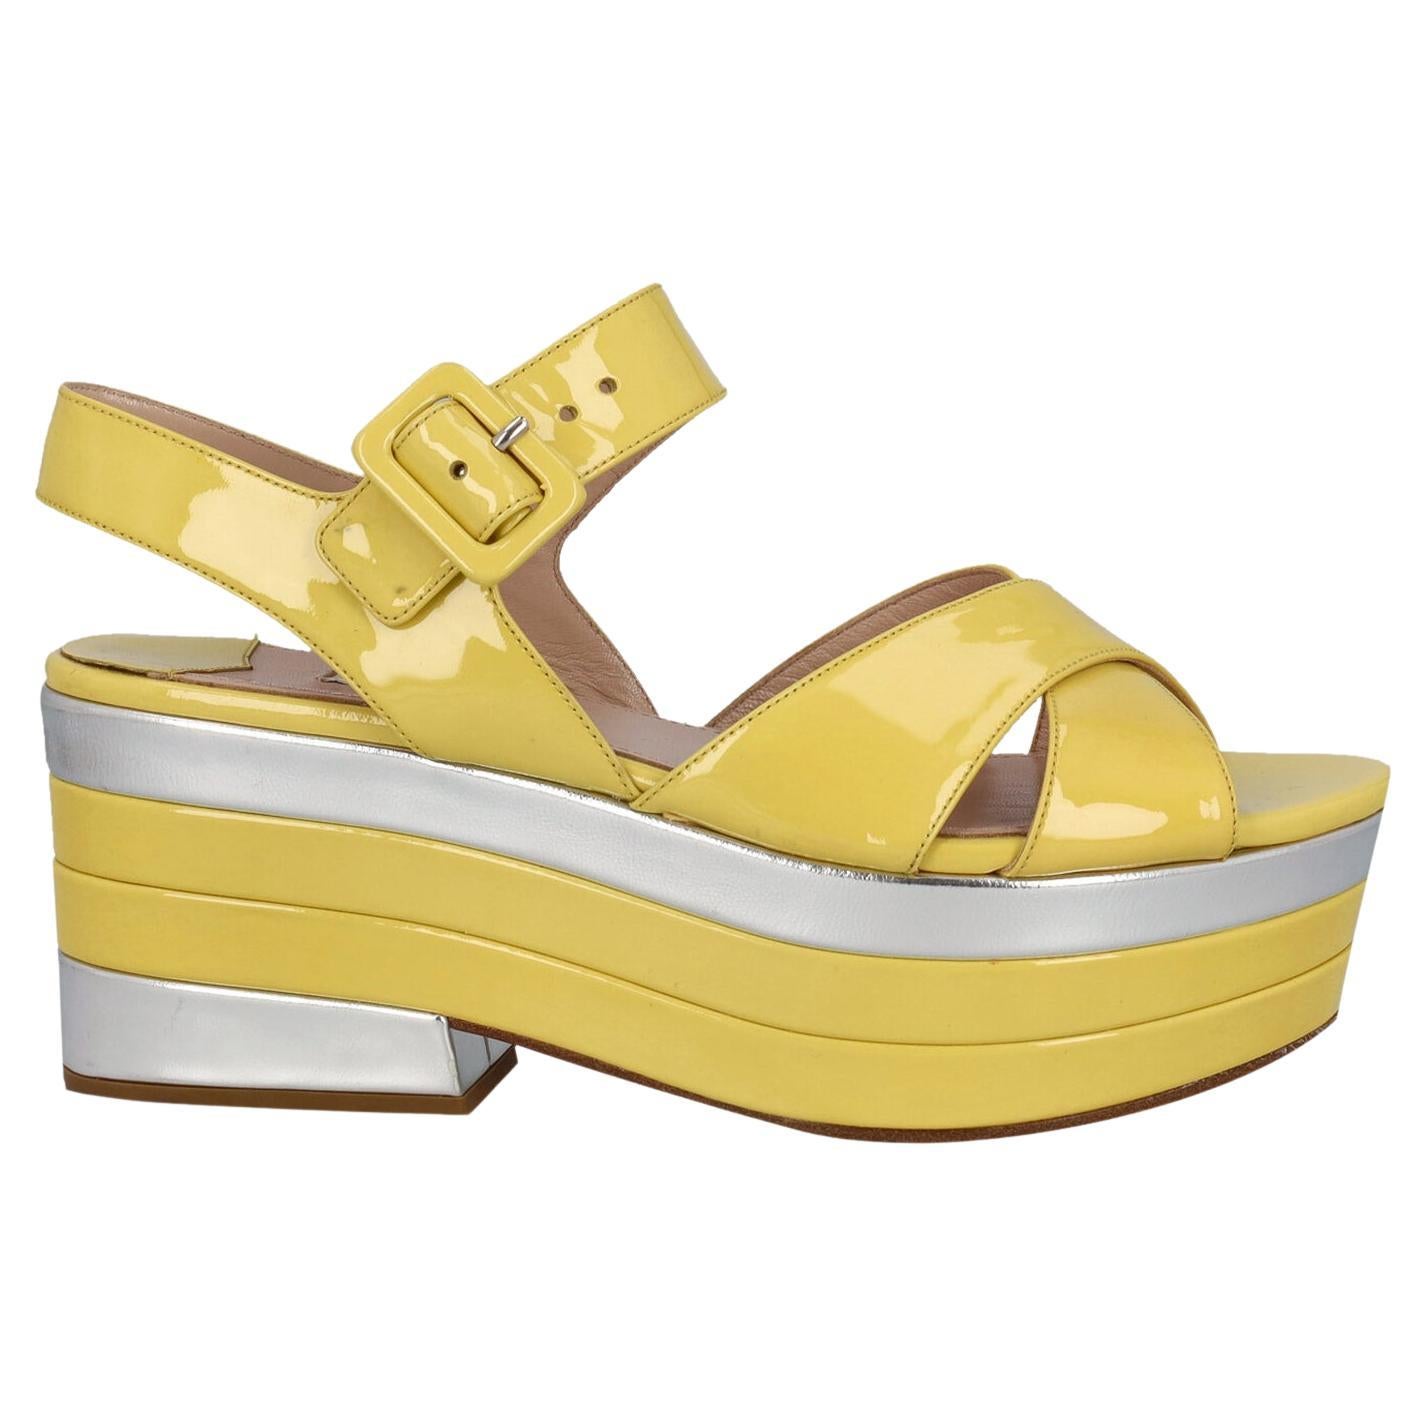 Miu Miu women's bow embellished patent leather flat pumps in yellow  size 36 used